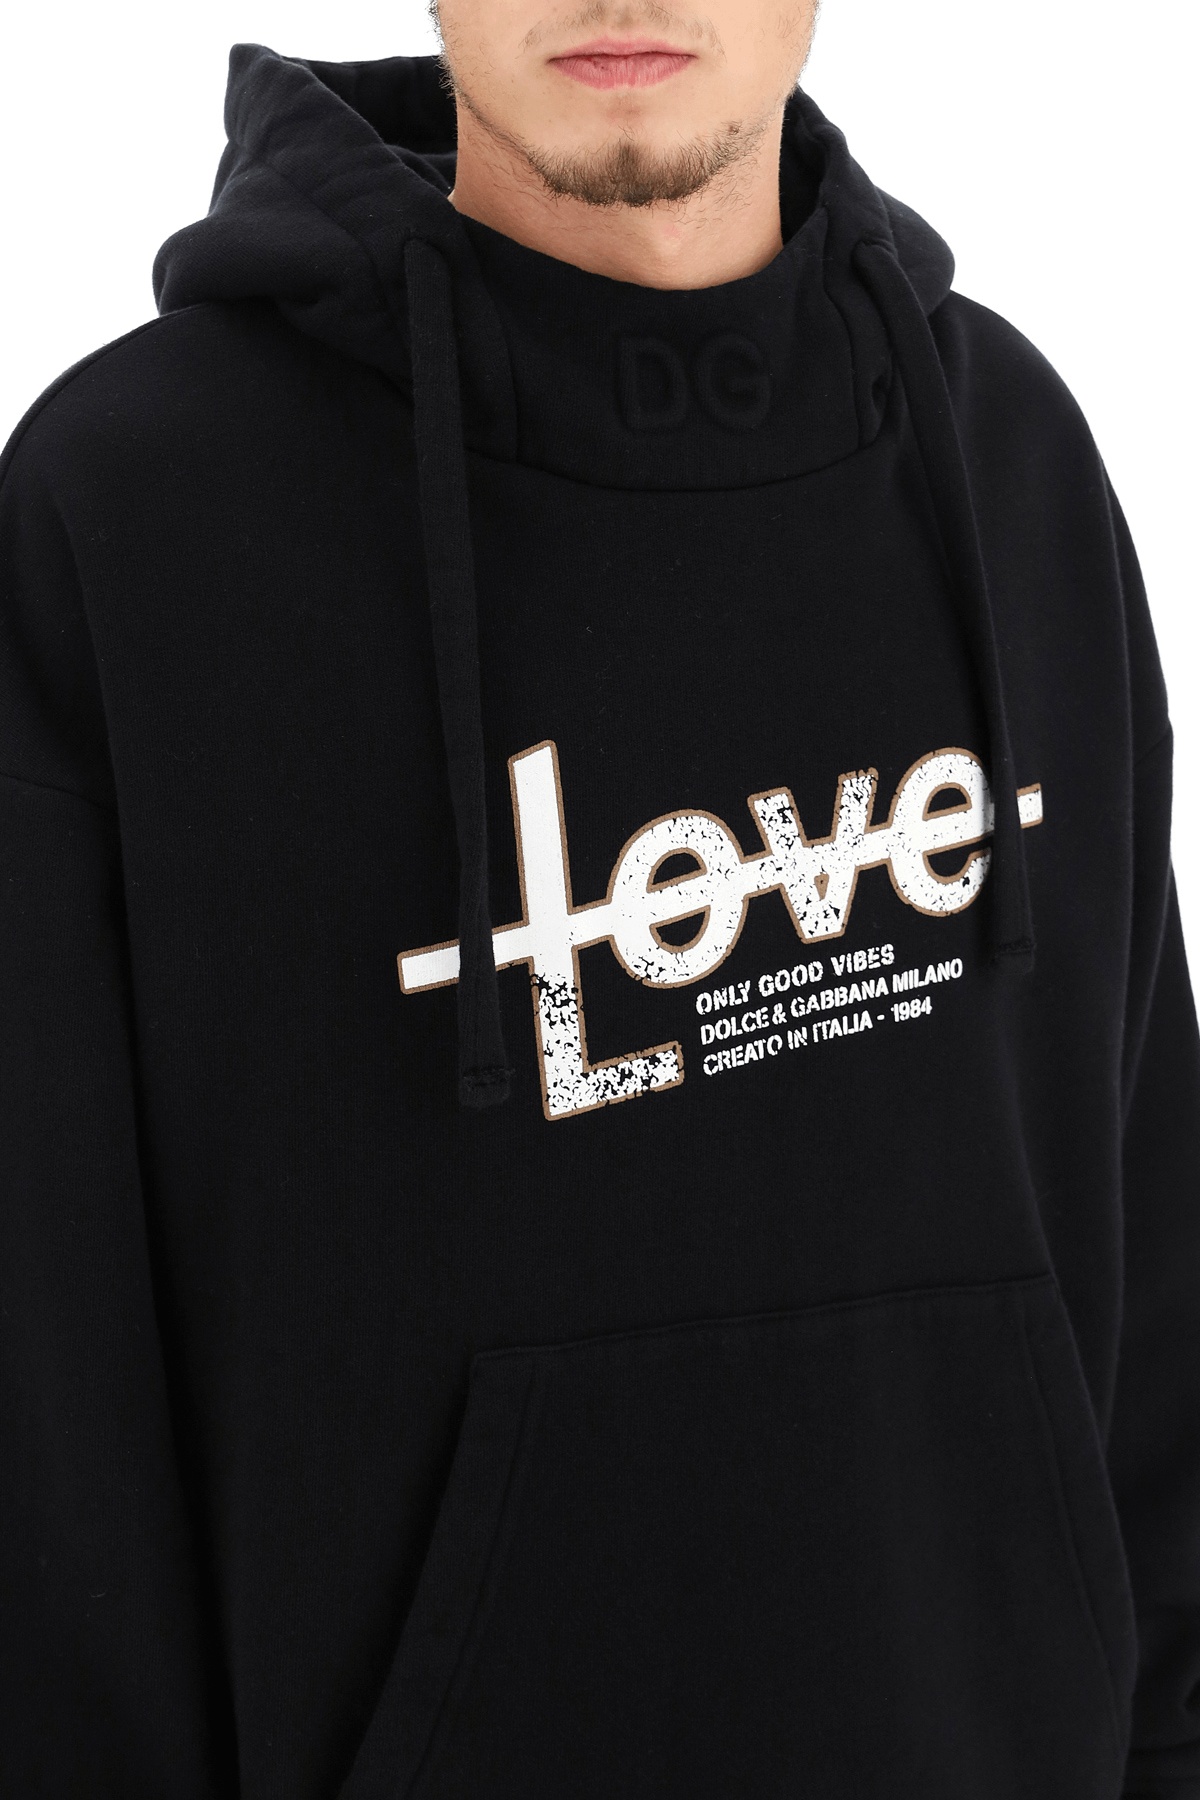 Dolce & Gabbana 'Only Good Vibes' Print Hoodie - 5